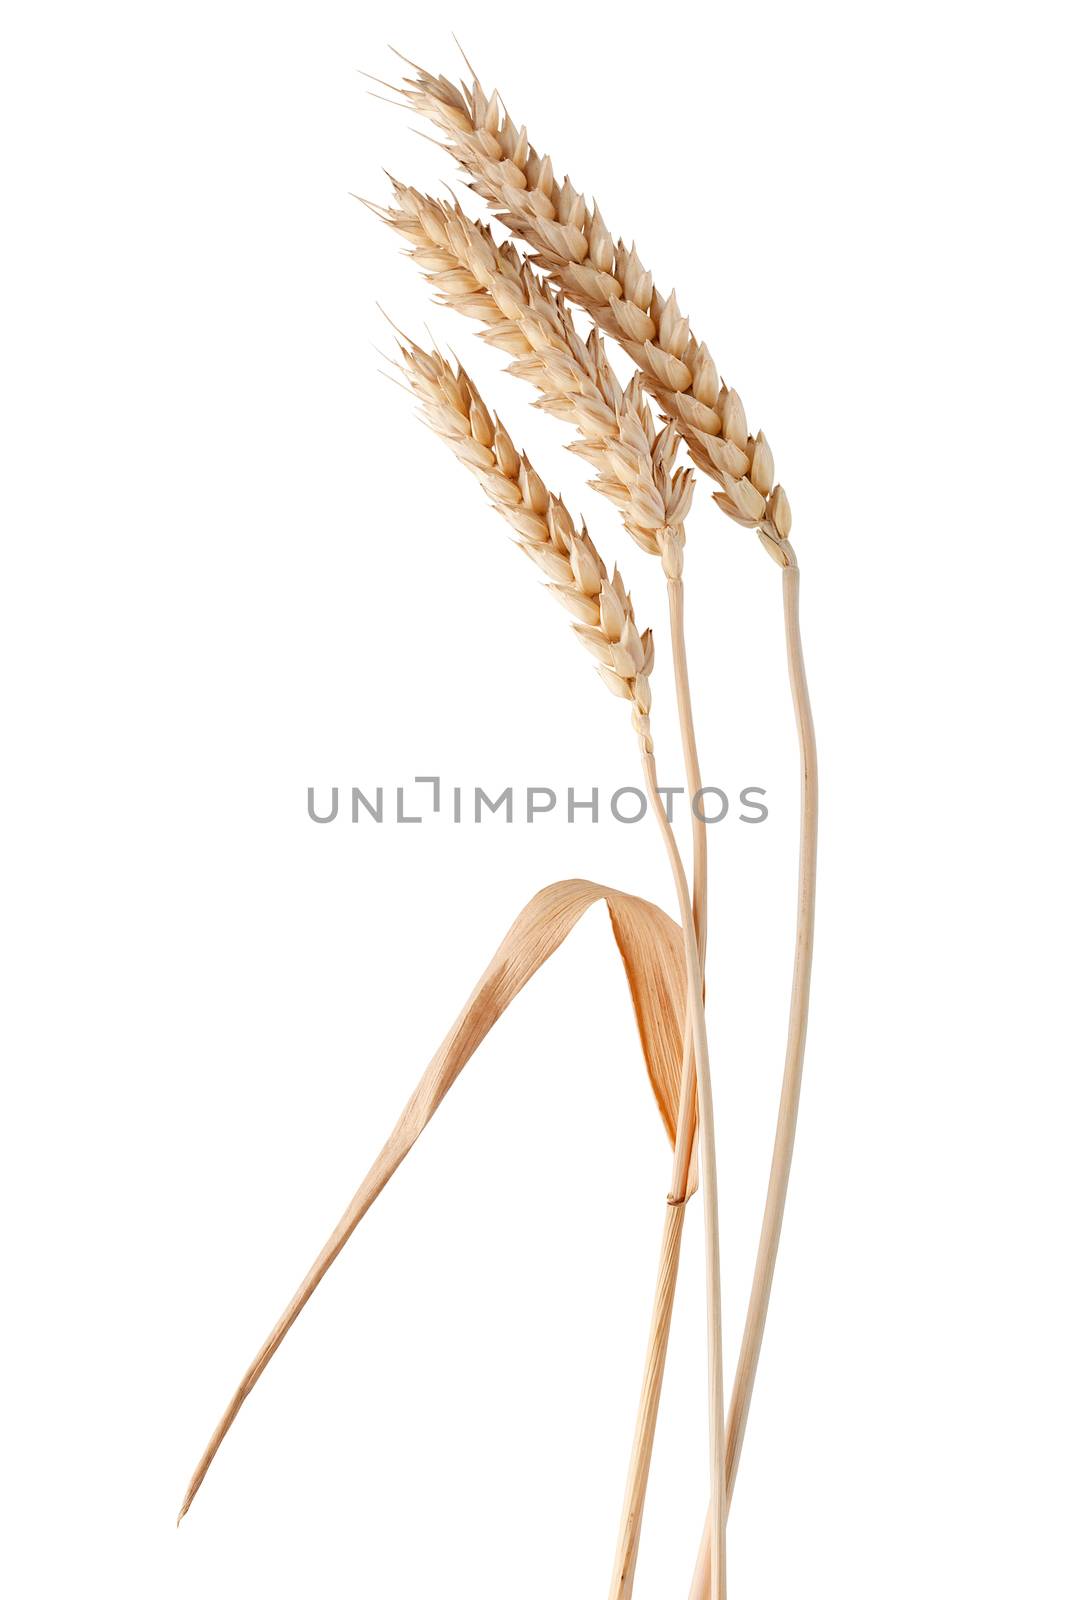 Three isolated yellow wheat spikelets on the white background